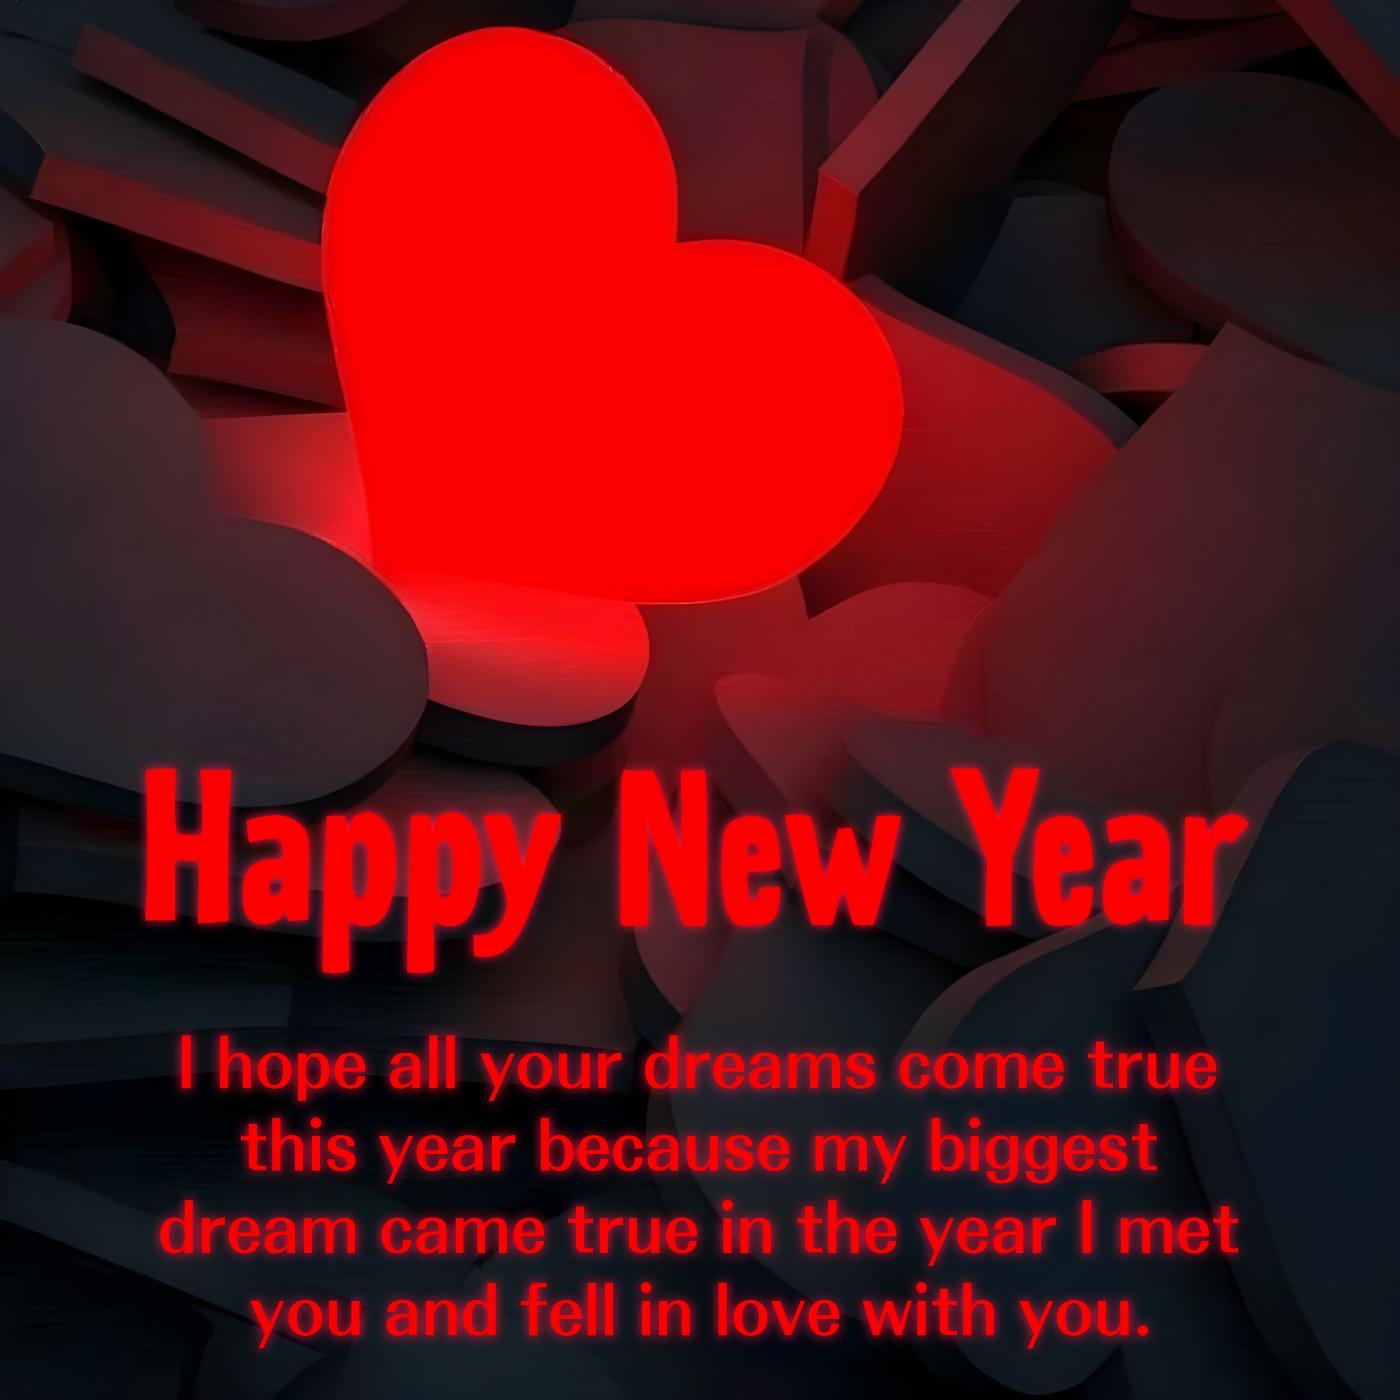 I hope all your dreams come true this year